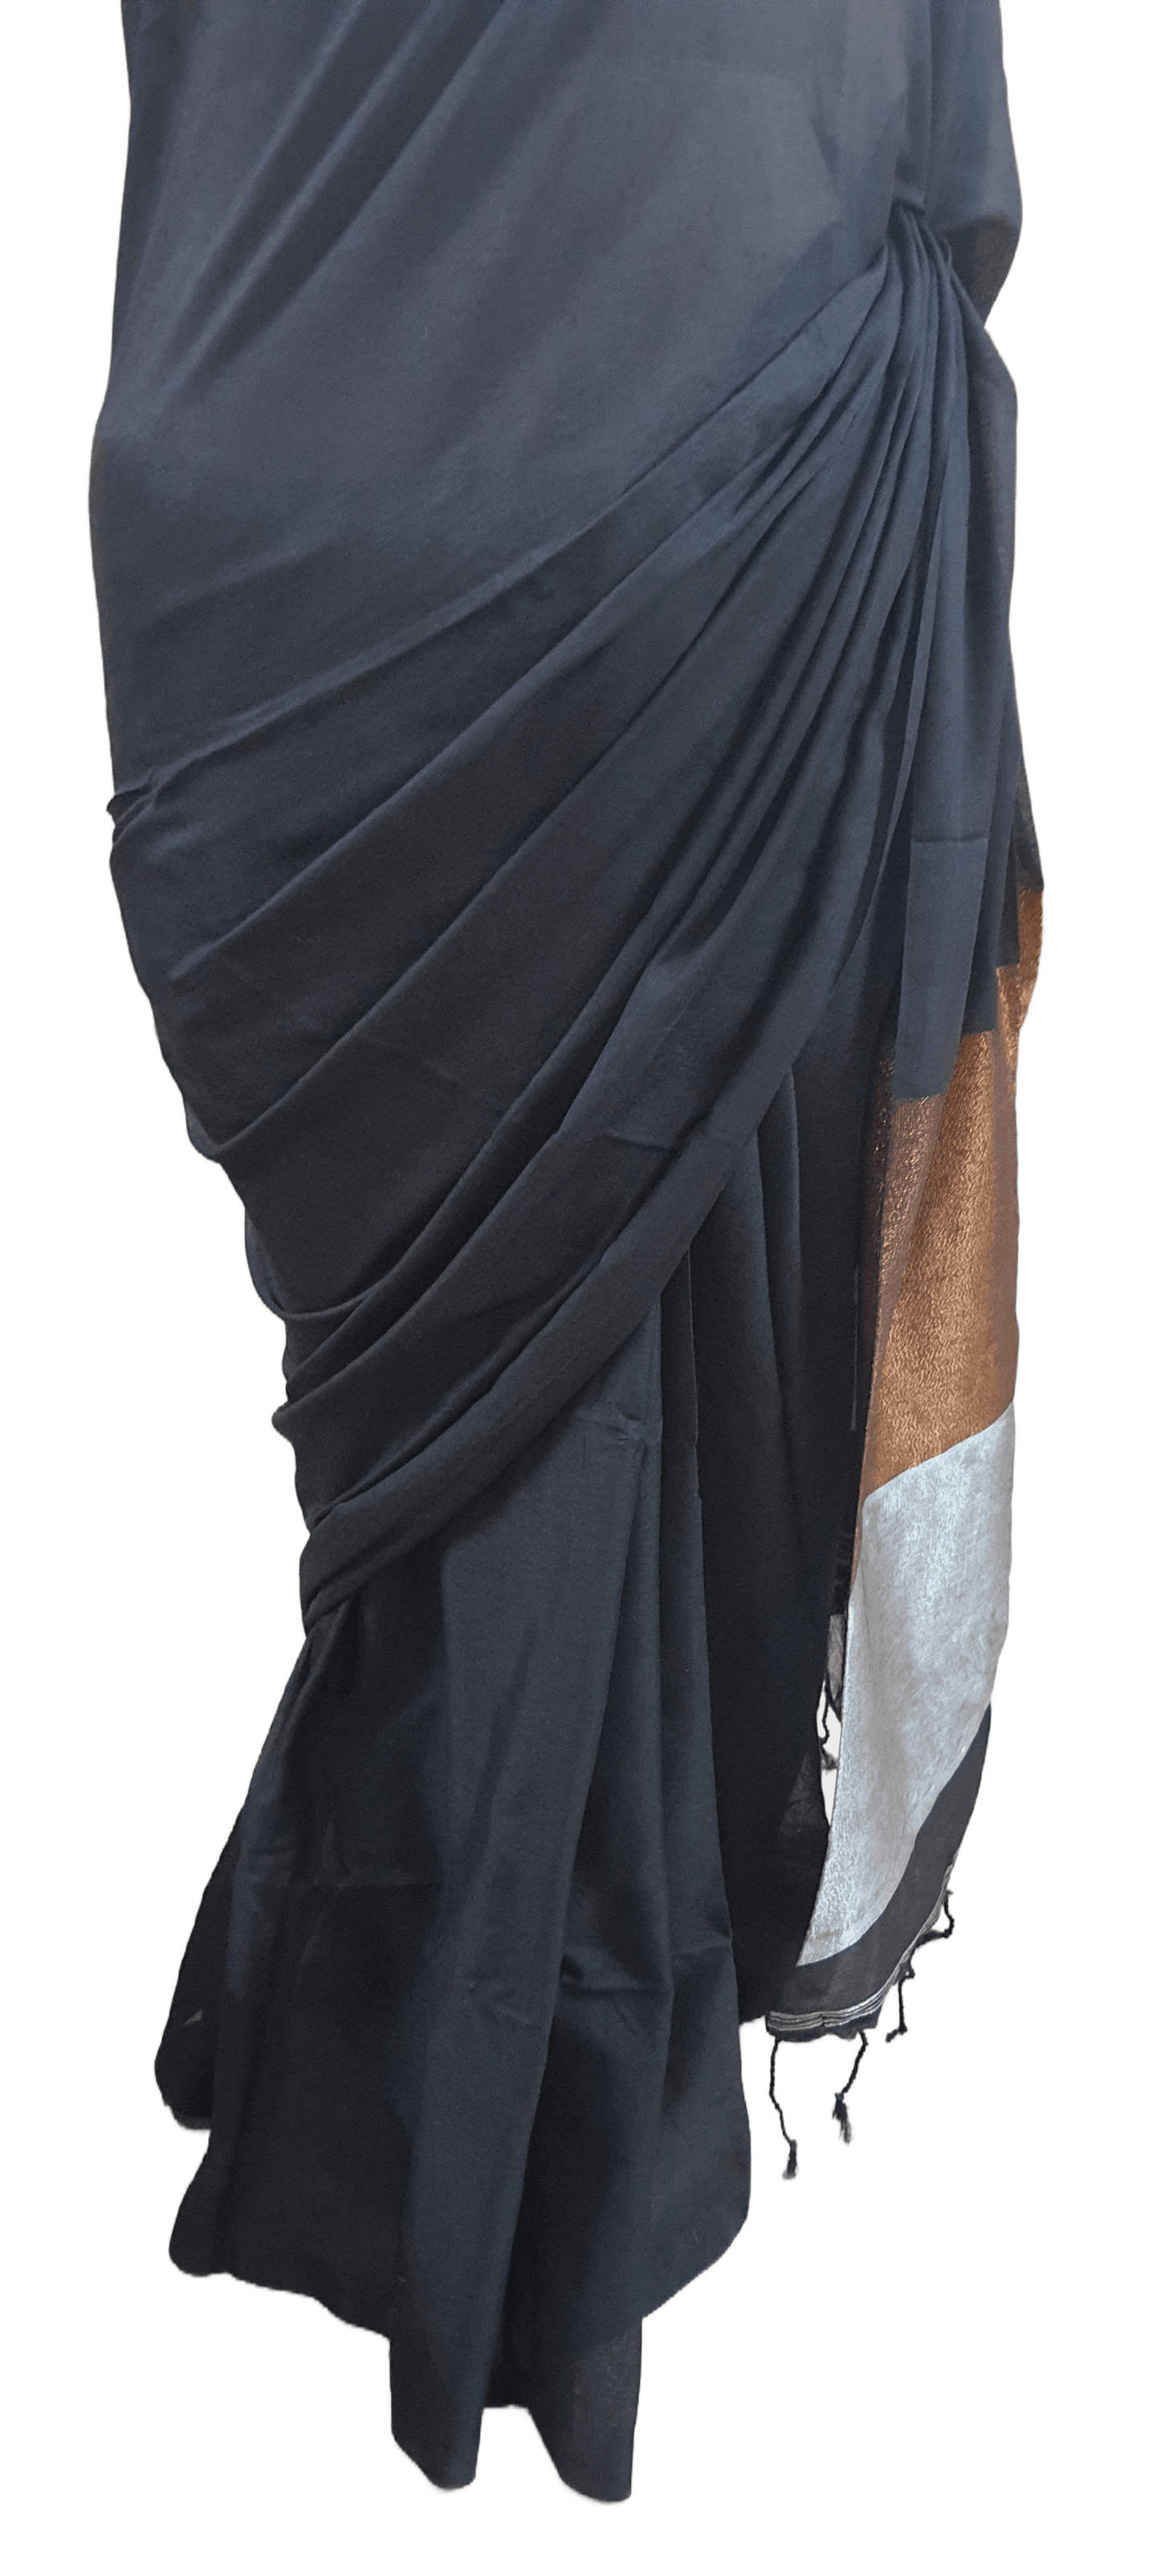 Black Handloom Cotton Saree with Pure Ikkat Silk Blouse BHR02 - Ethnic's By Anvi Creations